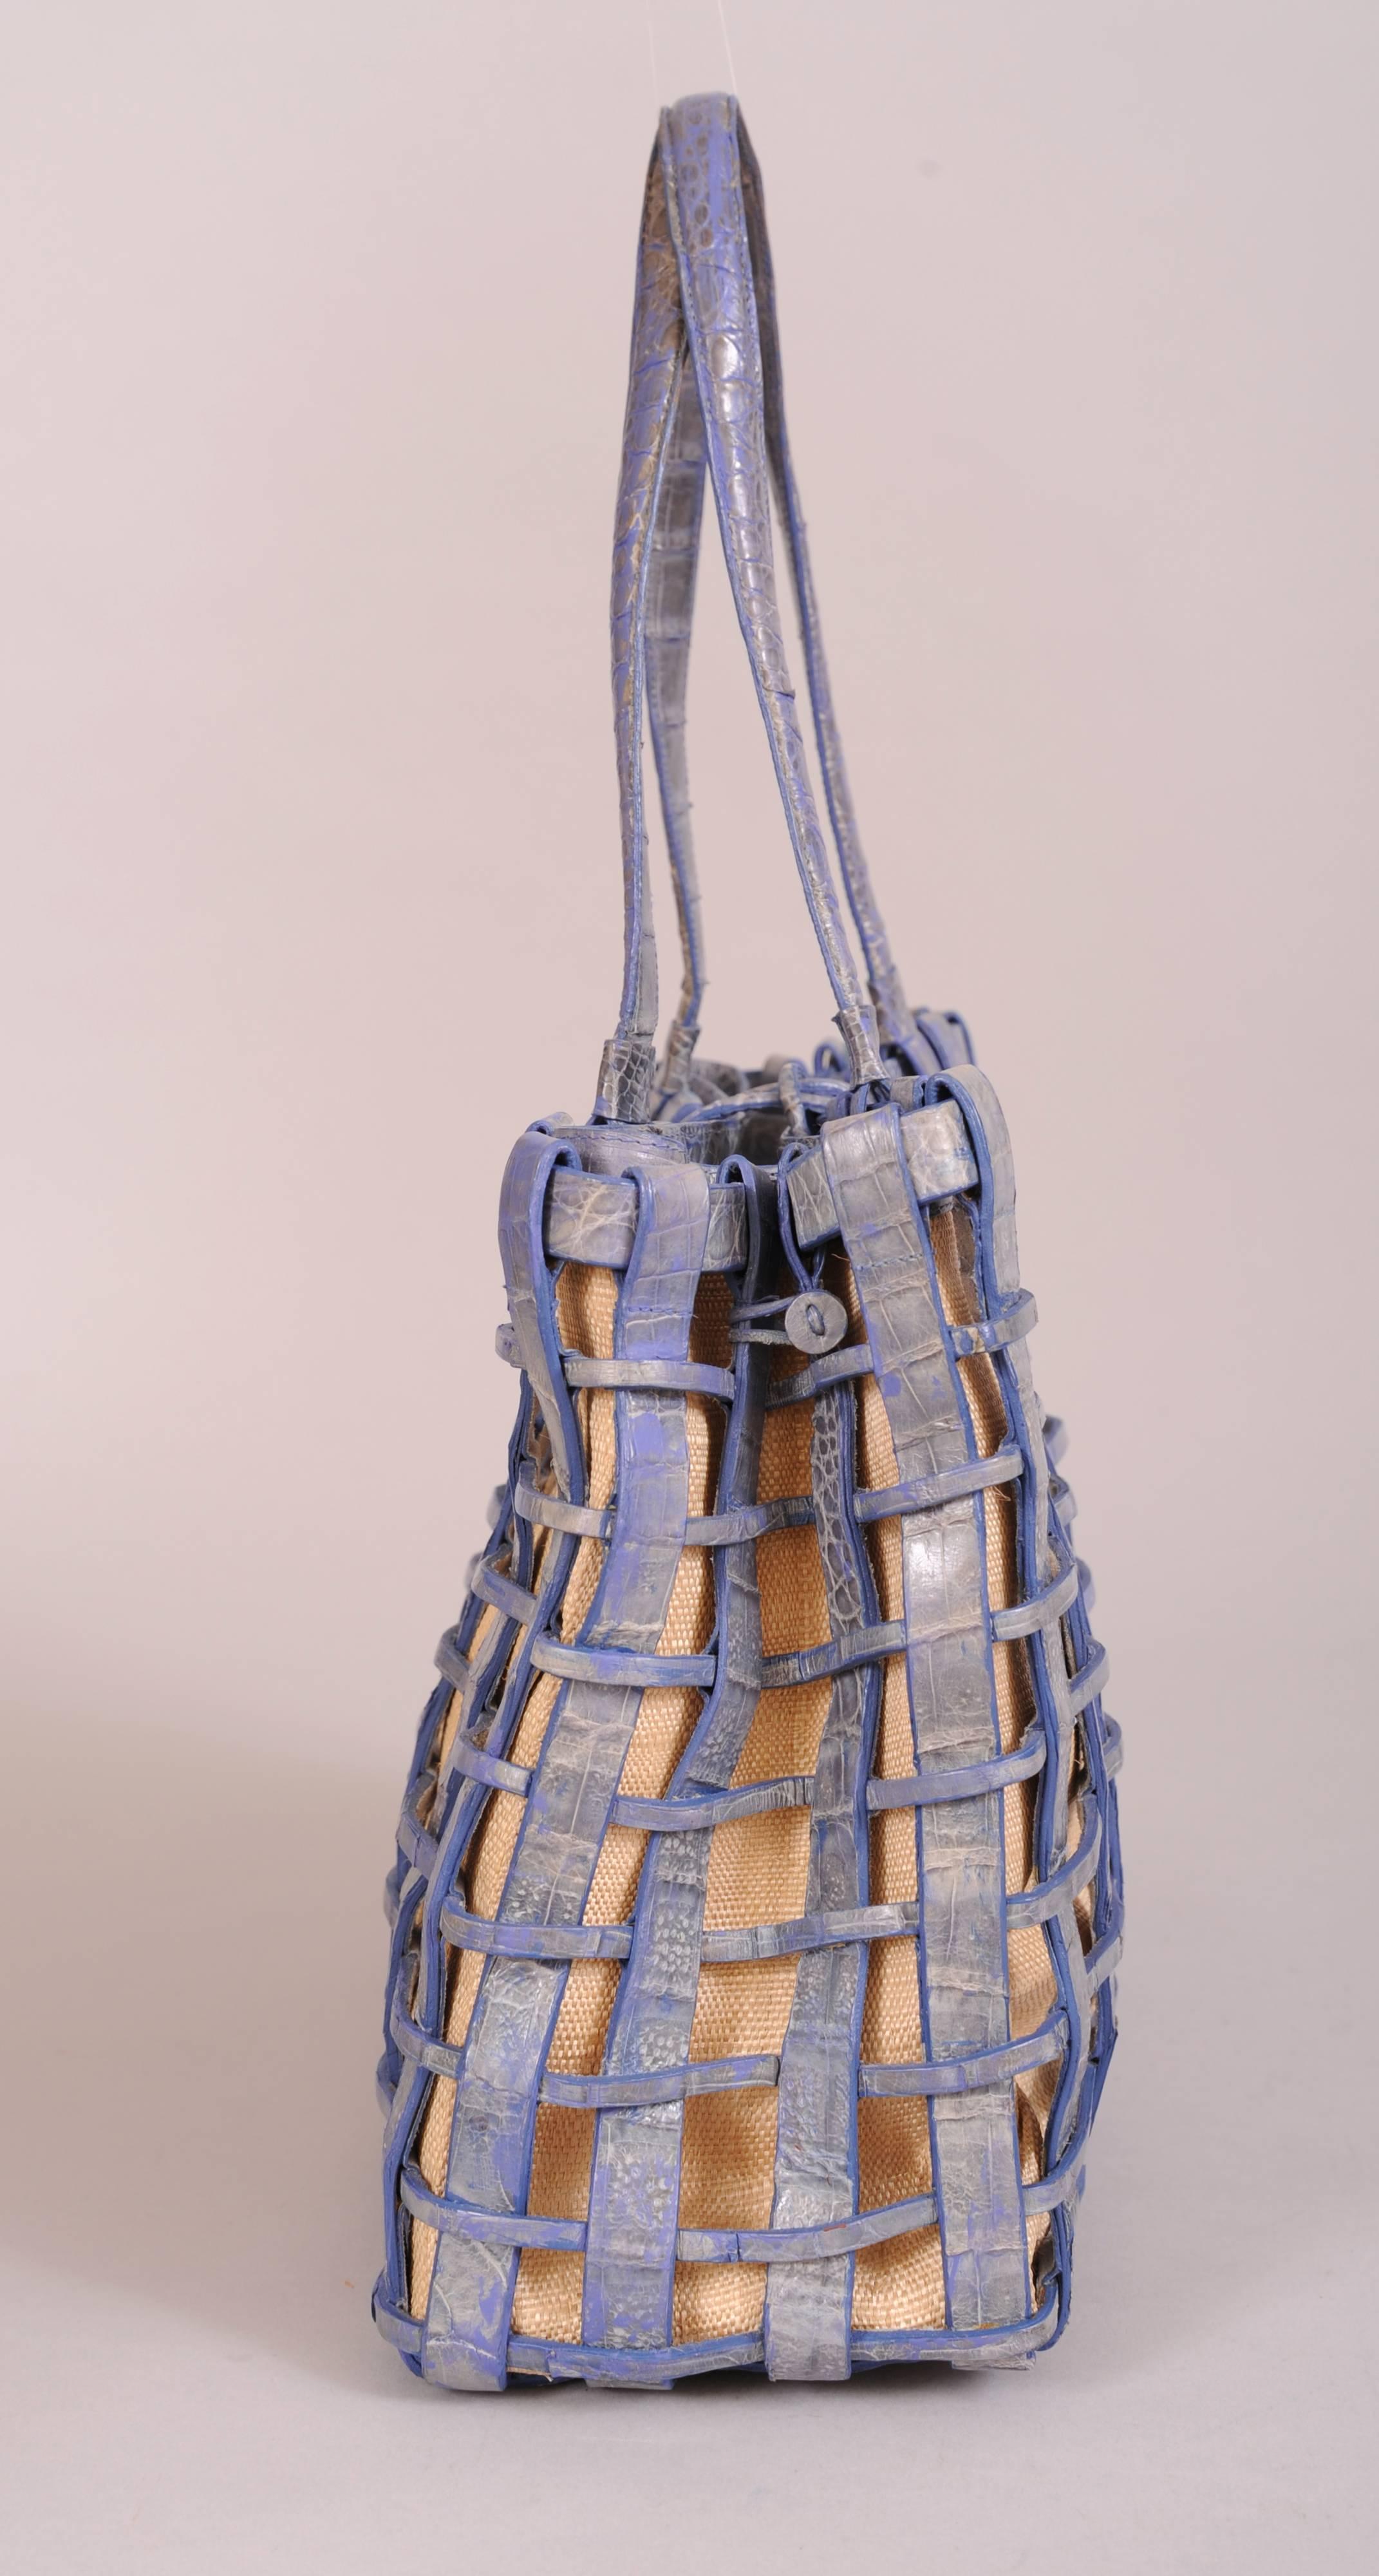 A woven blue crocodile cage bag matches the blue crocodile top edge of the removable woven raffia straw bag insert. This bag is lined in pale blue suede. it has a center zipped compartment and two open sections. One of these has a zippered pocket